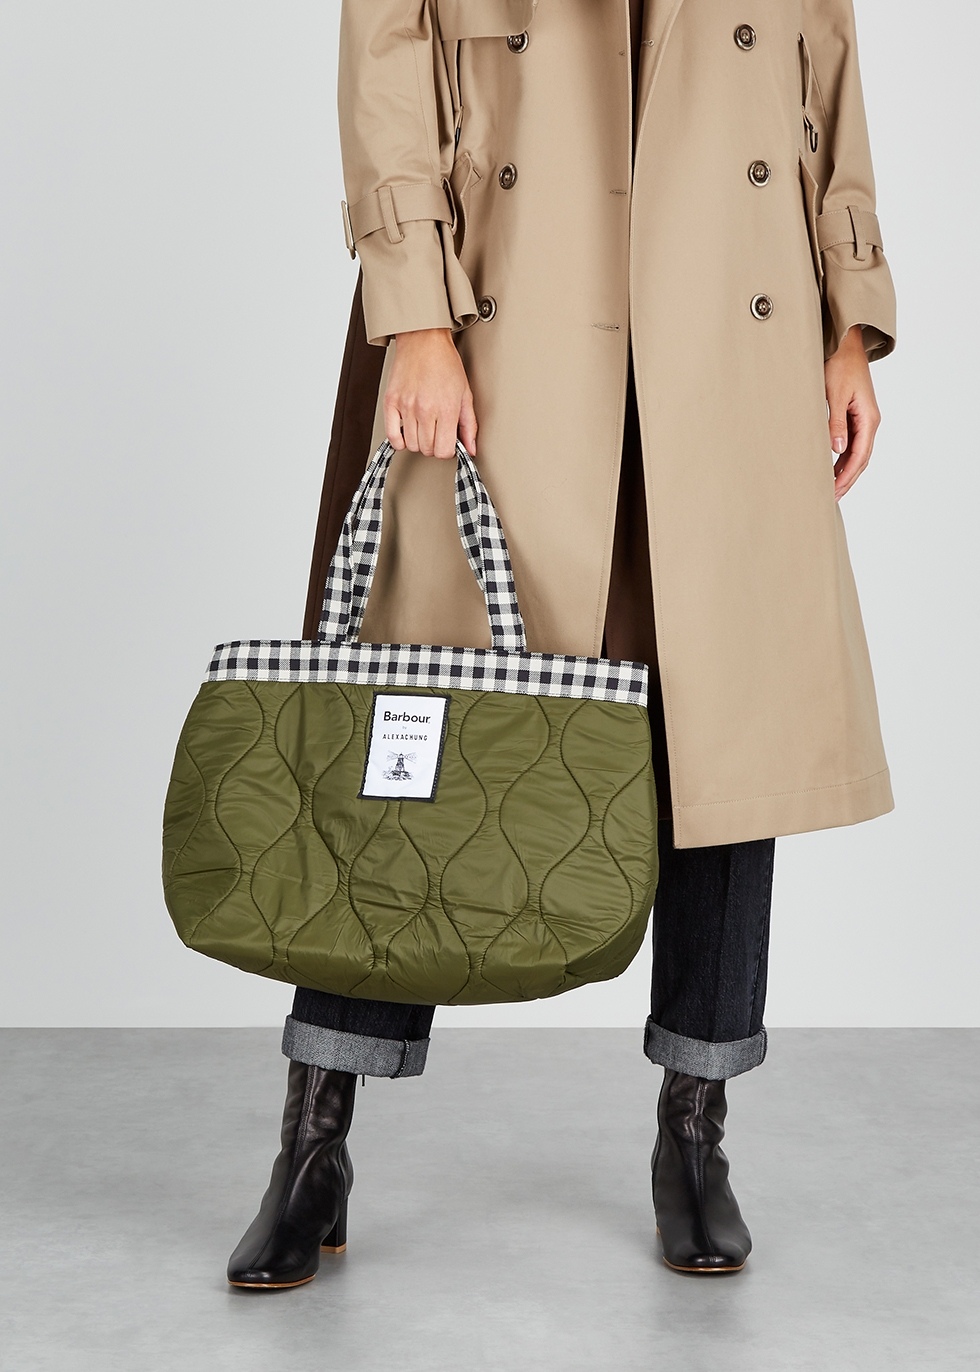 barbour tote